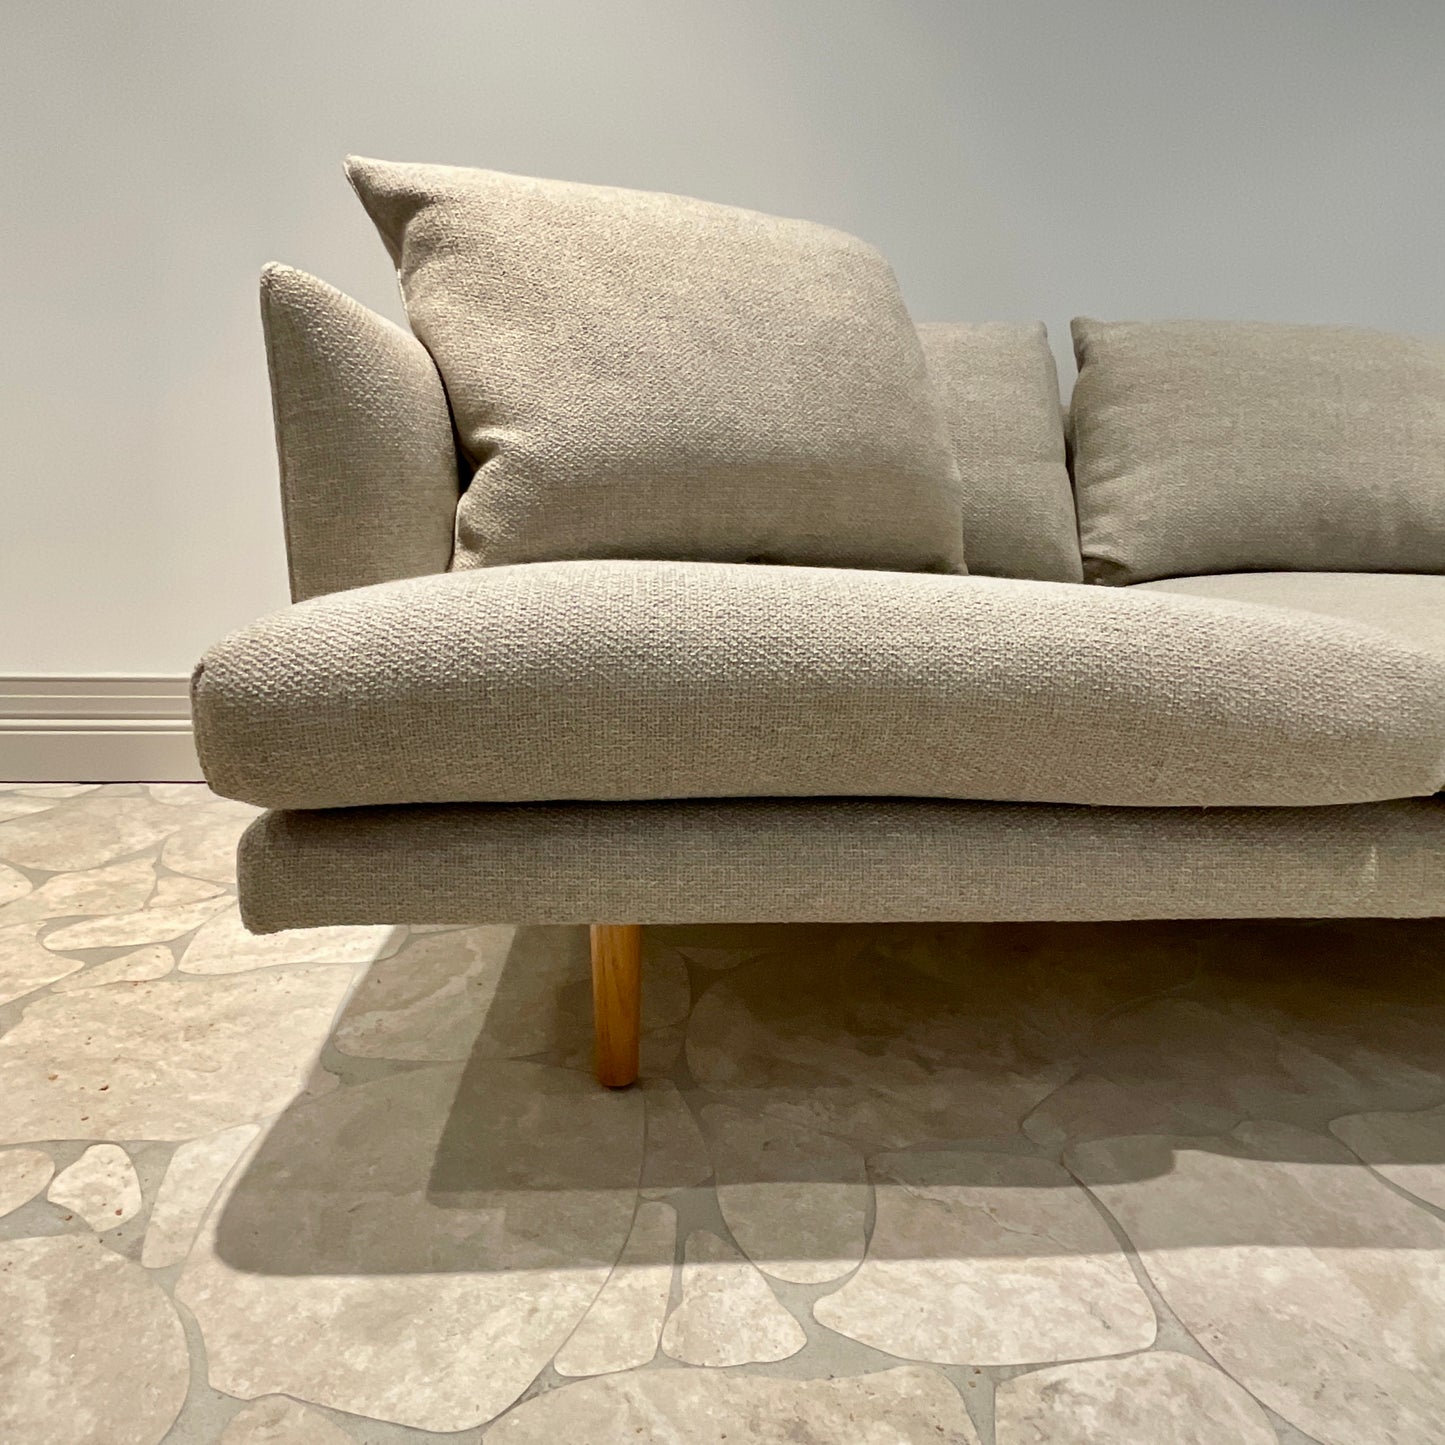 Load image into Gallery viewer, Nook 3.5 Seat Deep Sofa by Jardan
